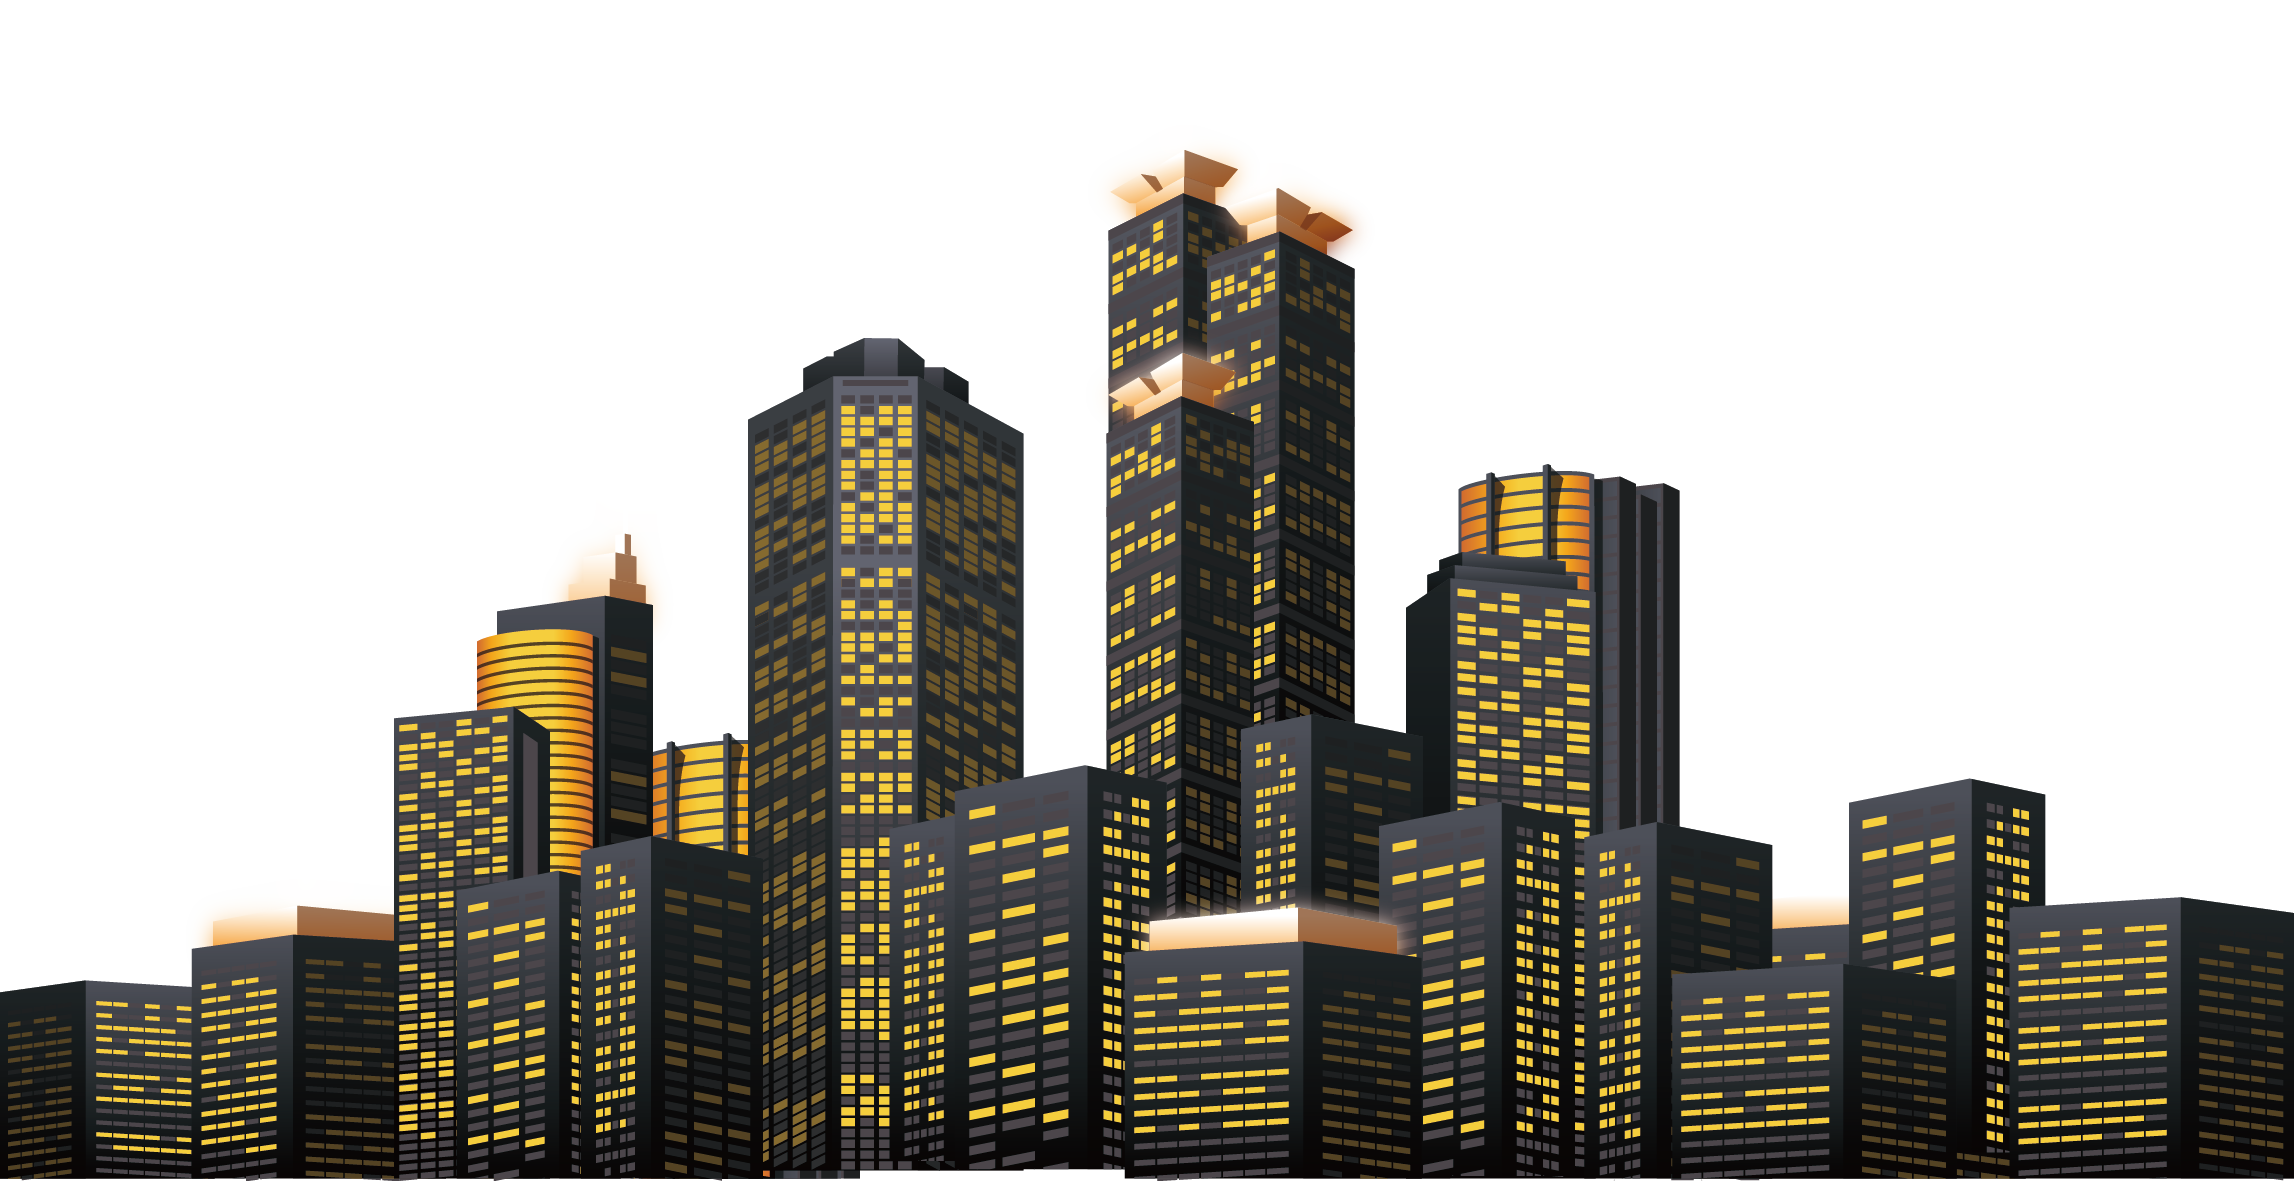 City Vector Png / Mexico city Vector, Skyline, SVG, JPG, PNG, DWG, CDR